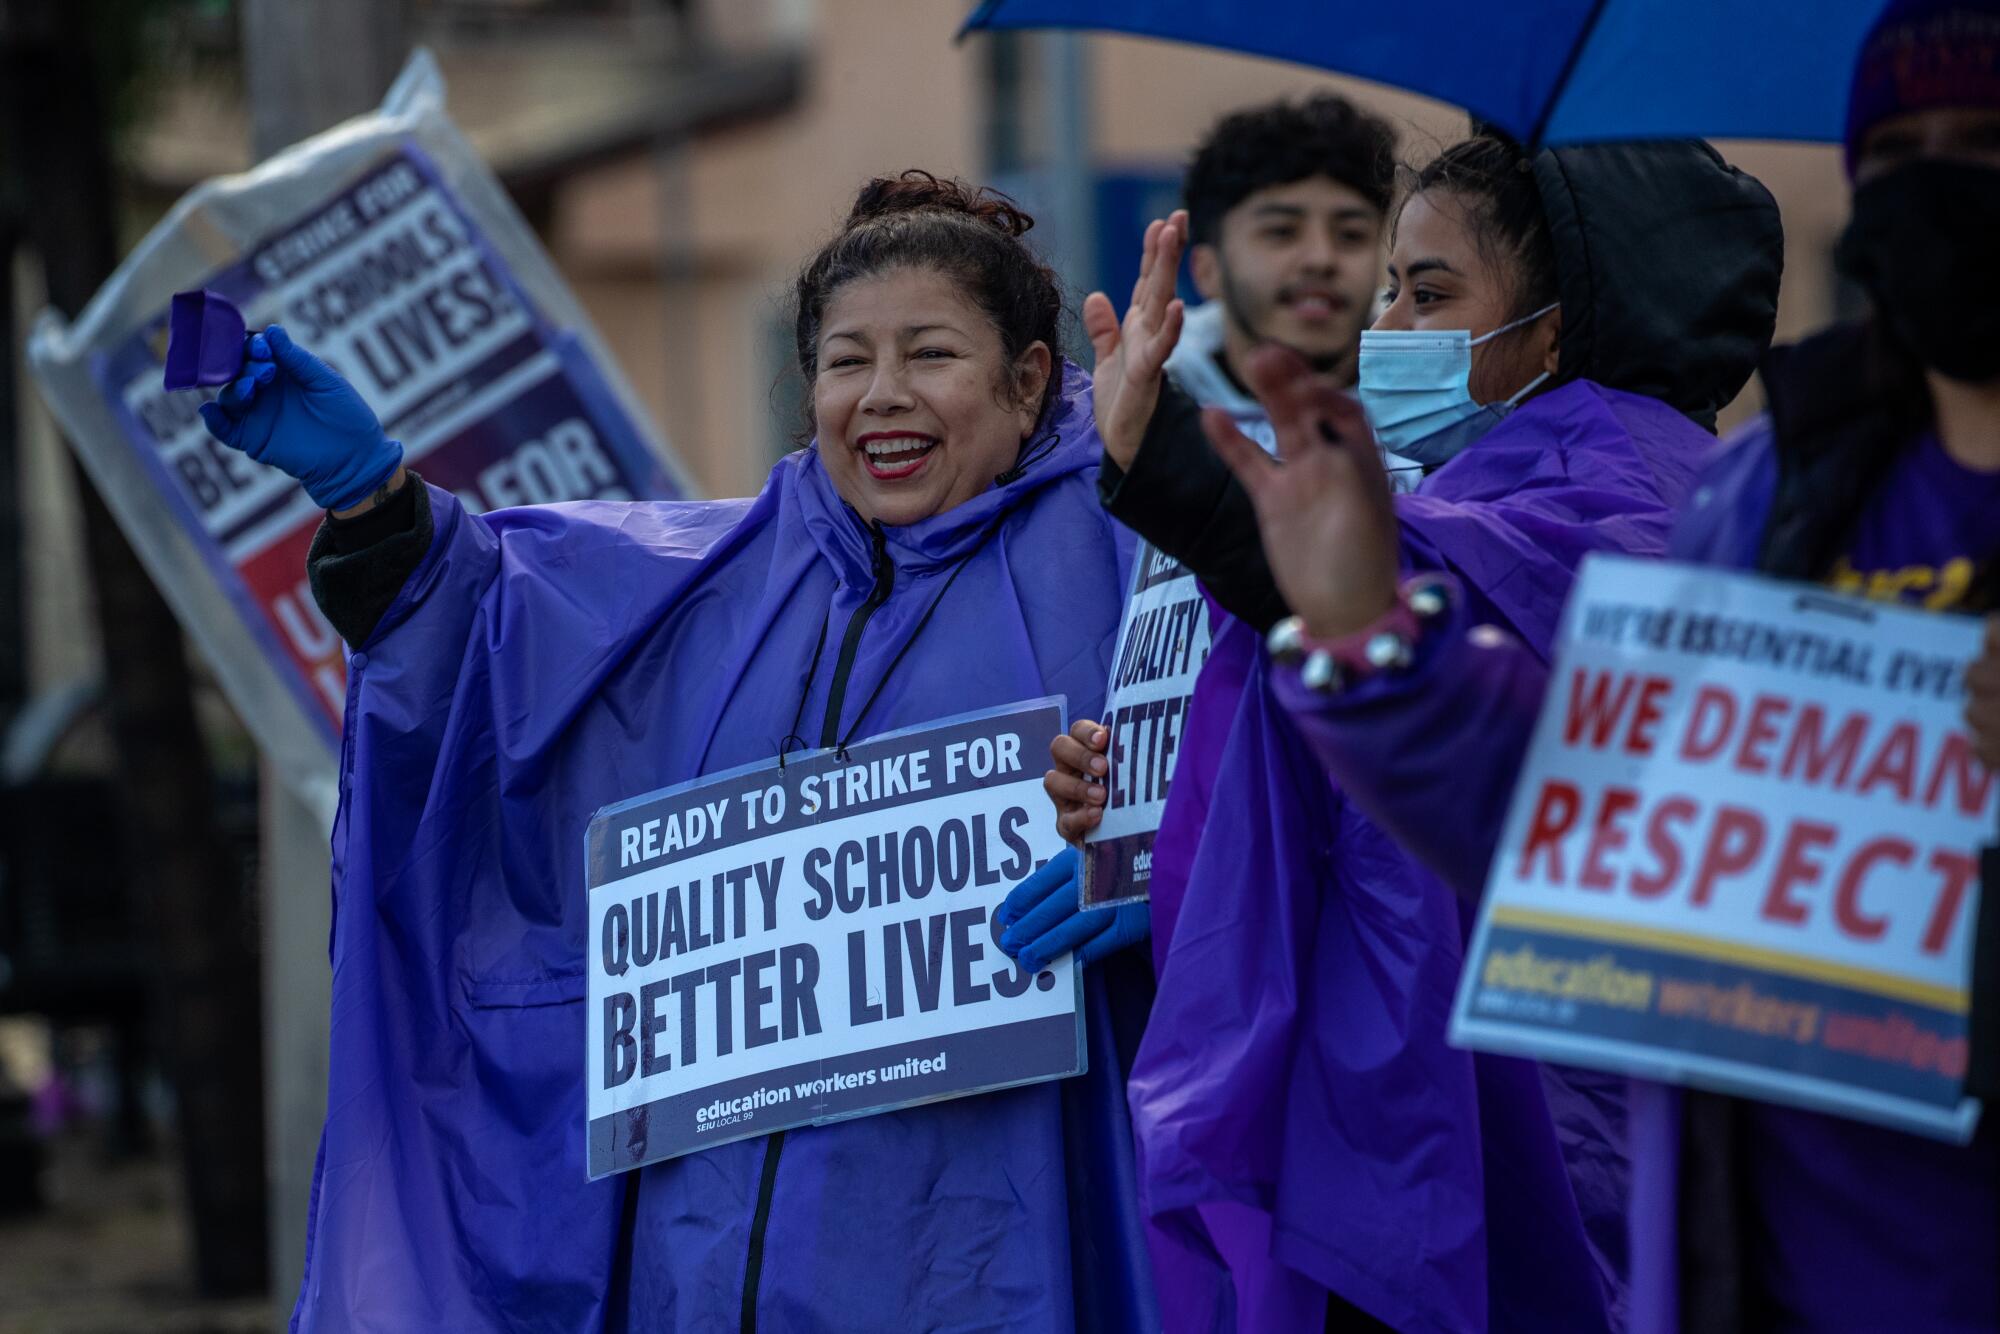 Yadira Martinez, 53, left, works for LAUSD as special education assistant, on strike joins the picket line